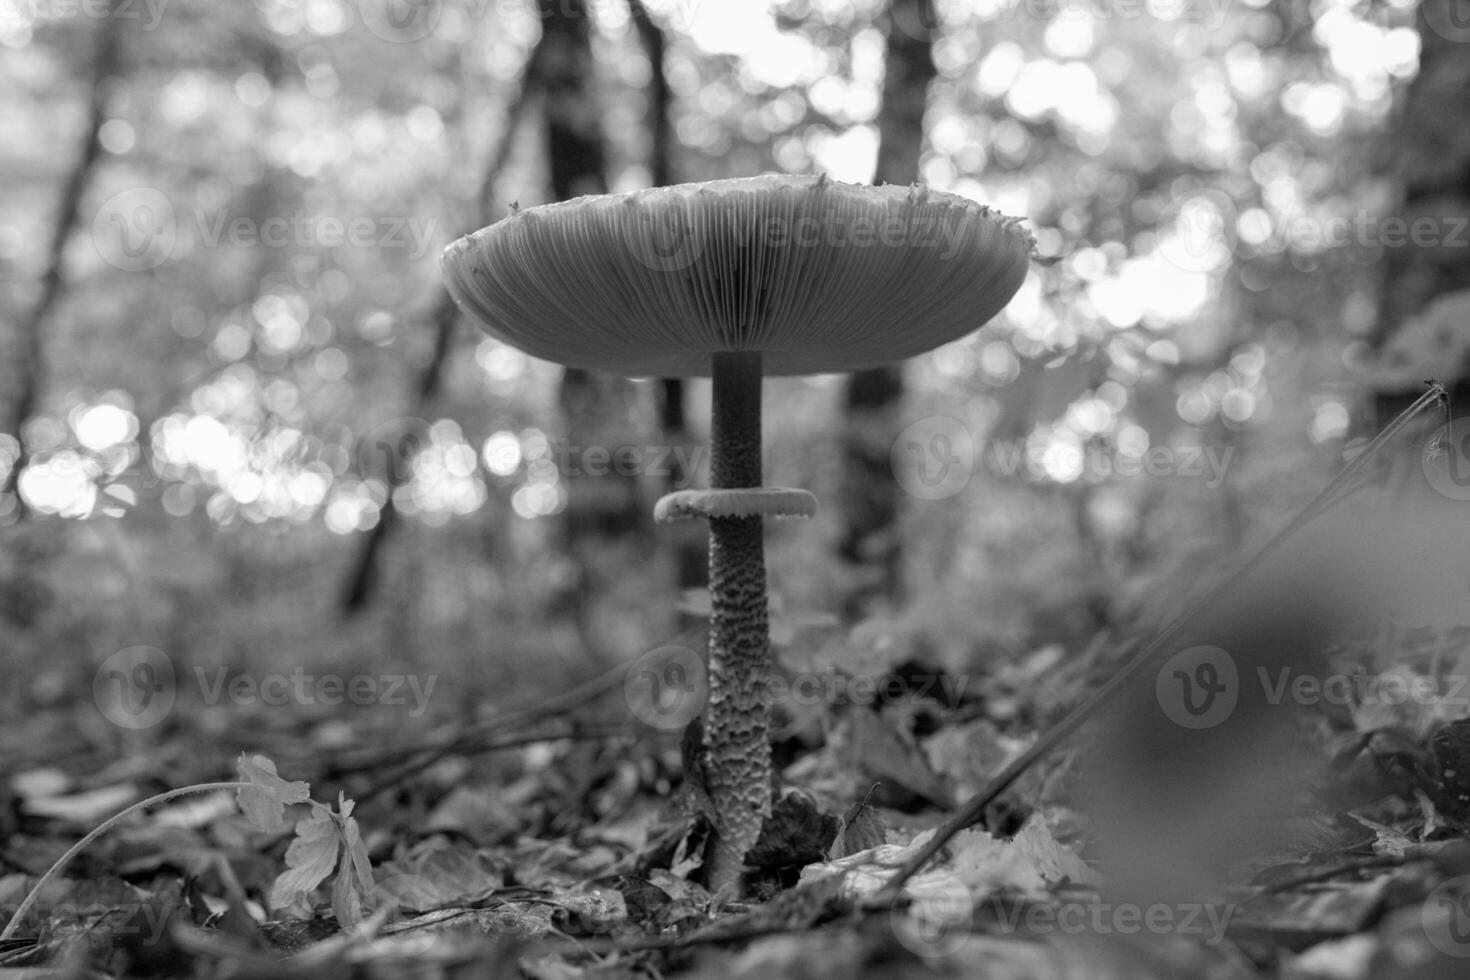 Photography to theme beautiful mushroom amanita Muscaria in forest photo